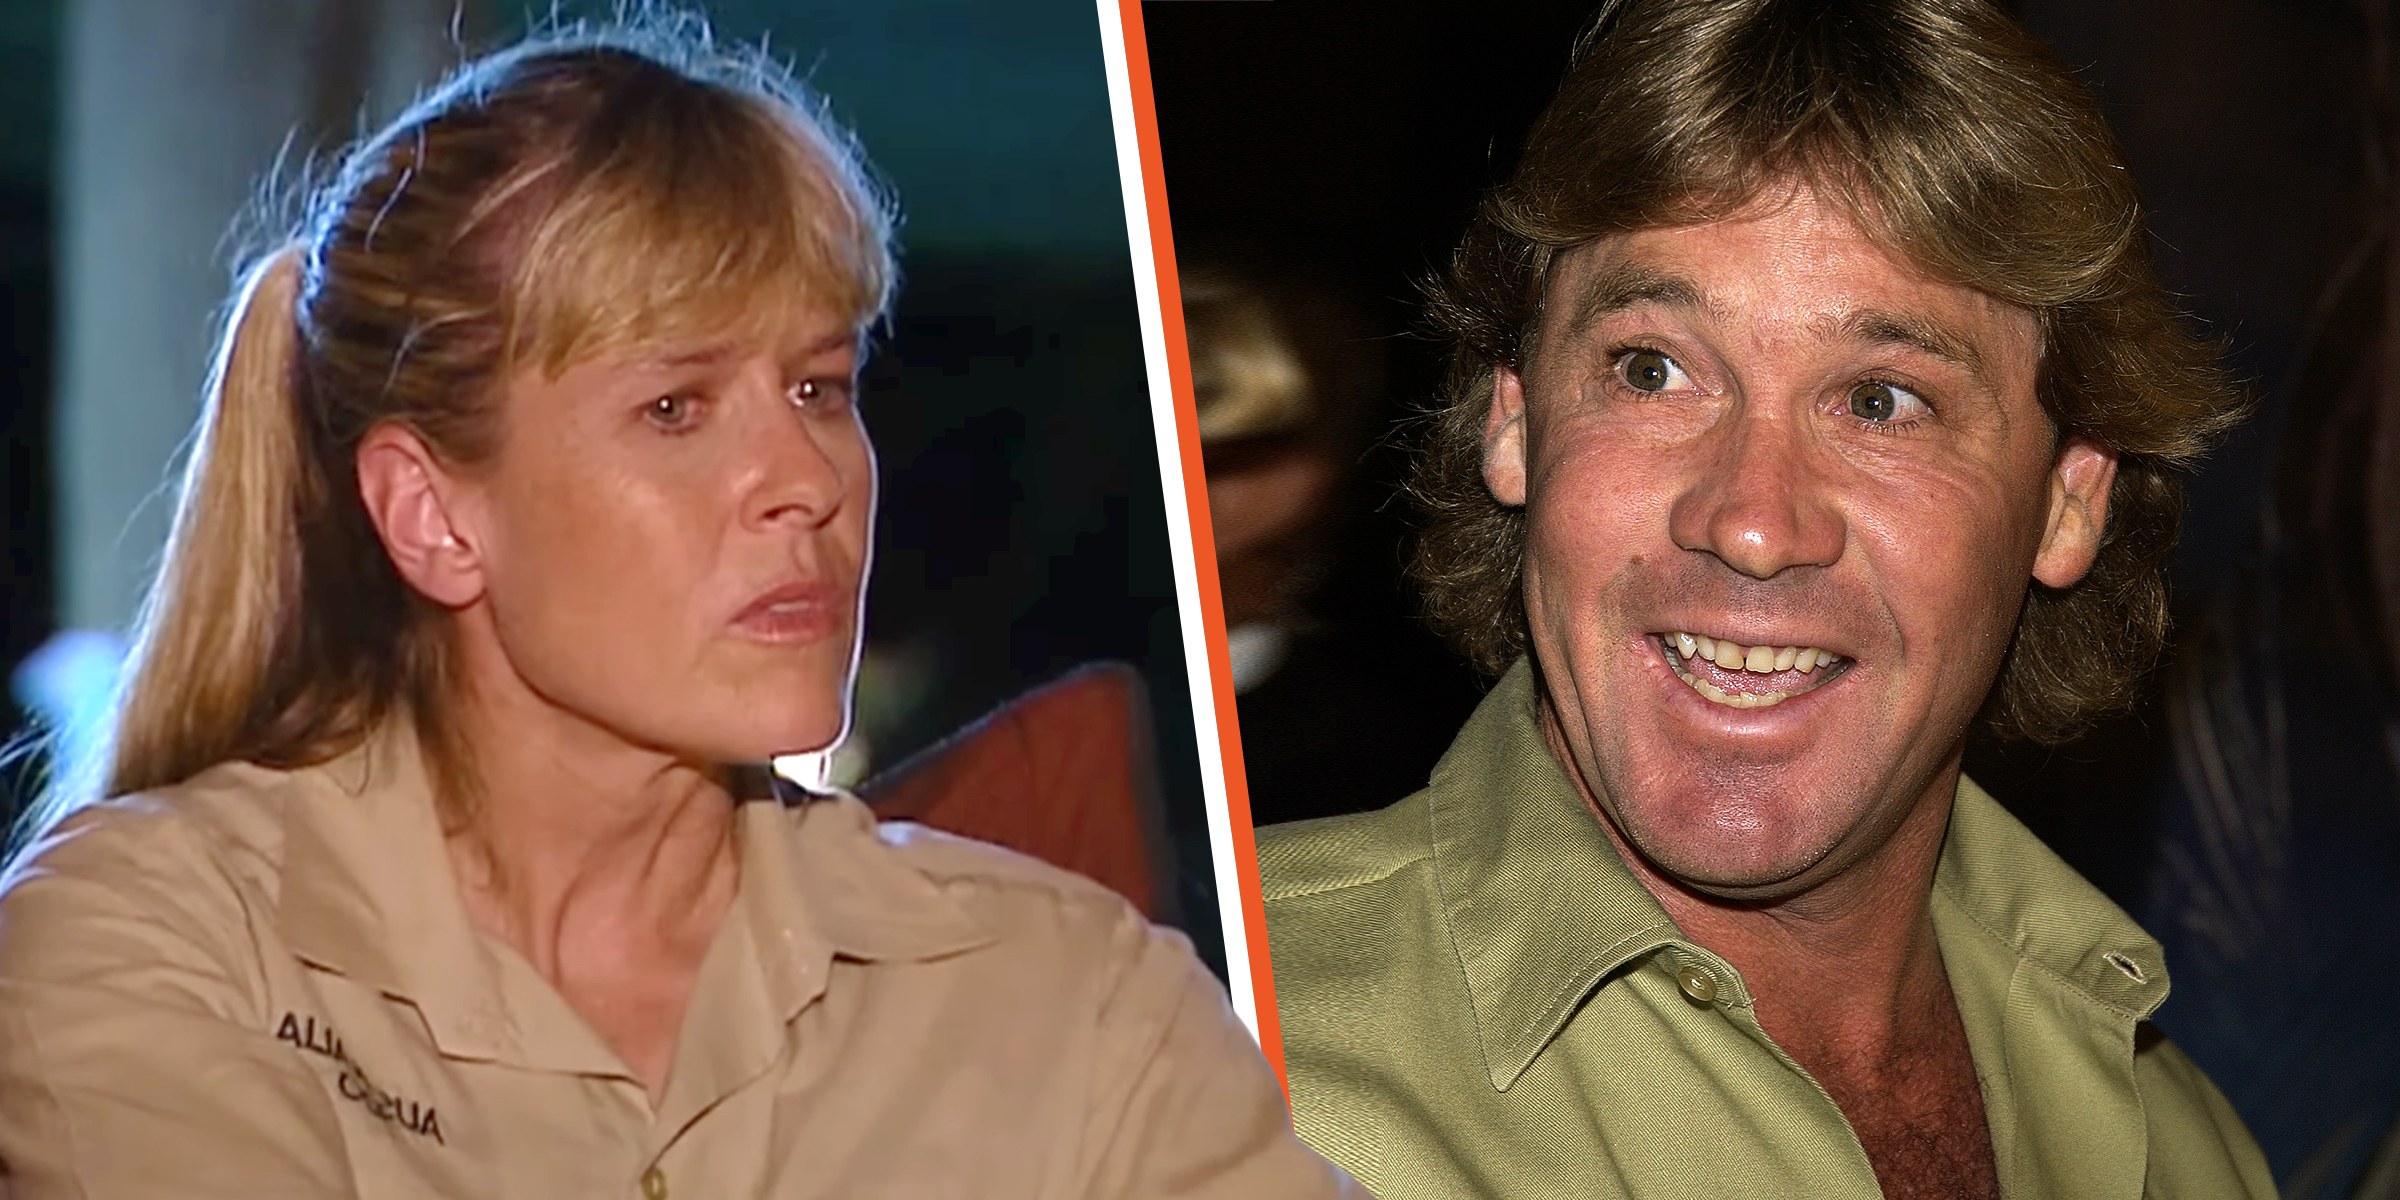 Steve and Terri Irwin | Source: Getty Images